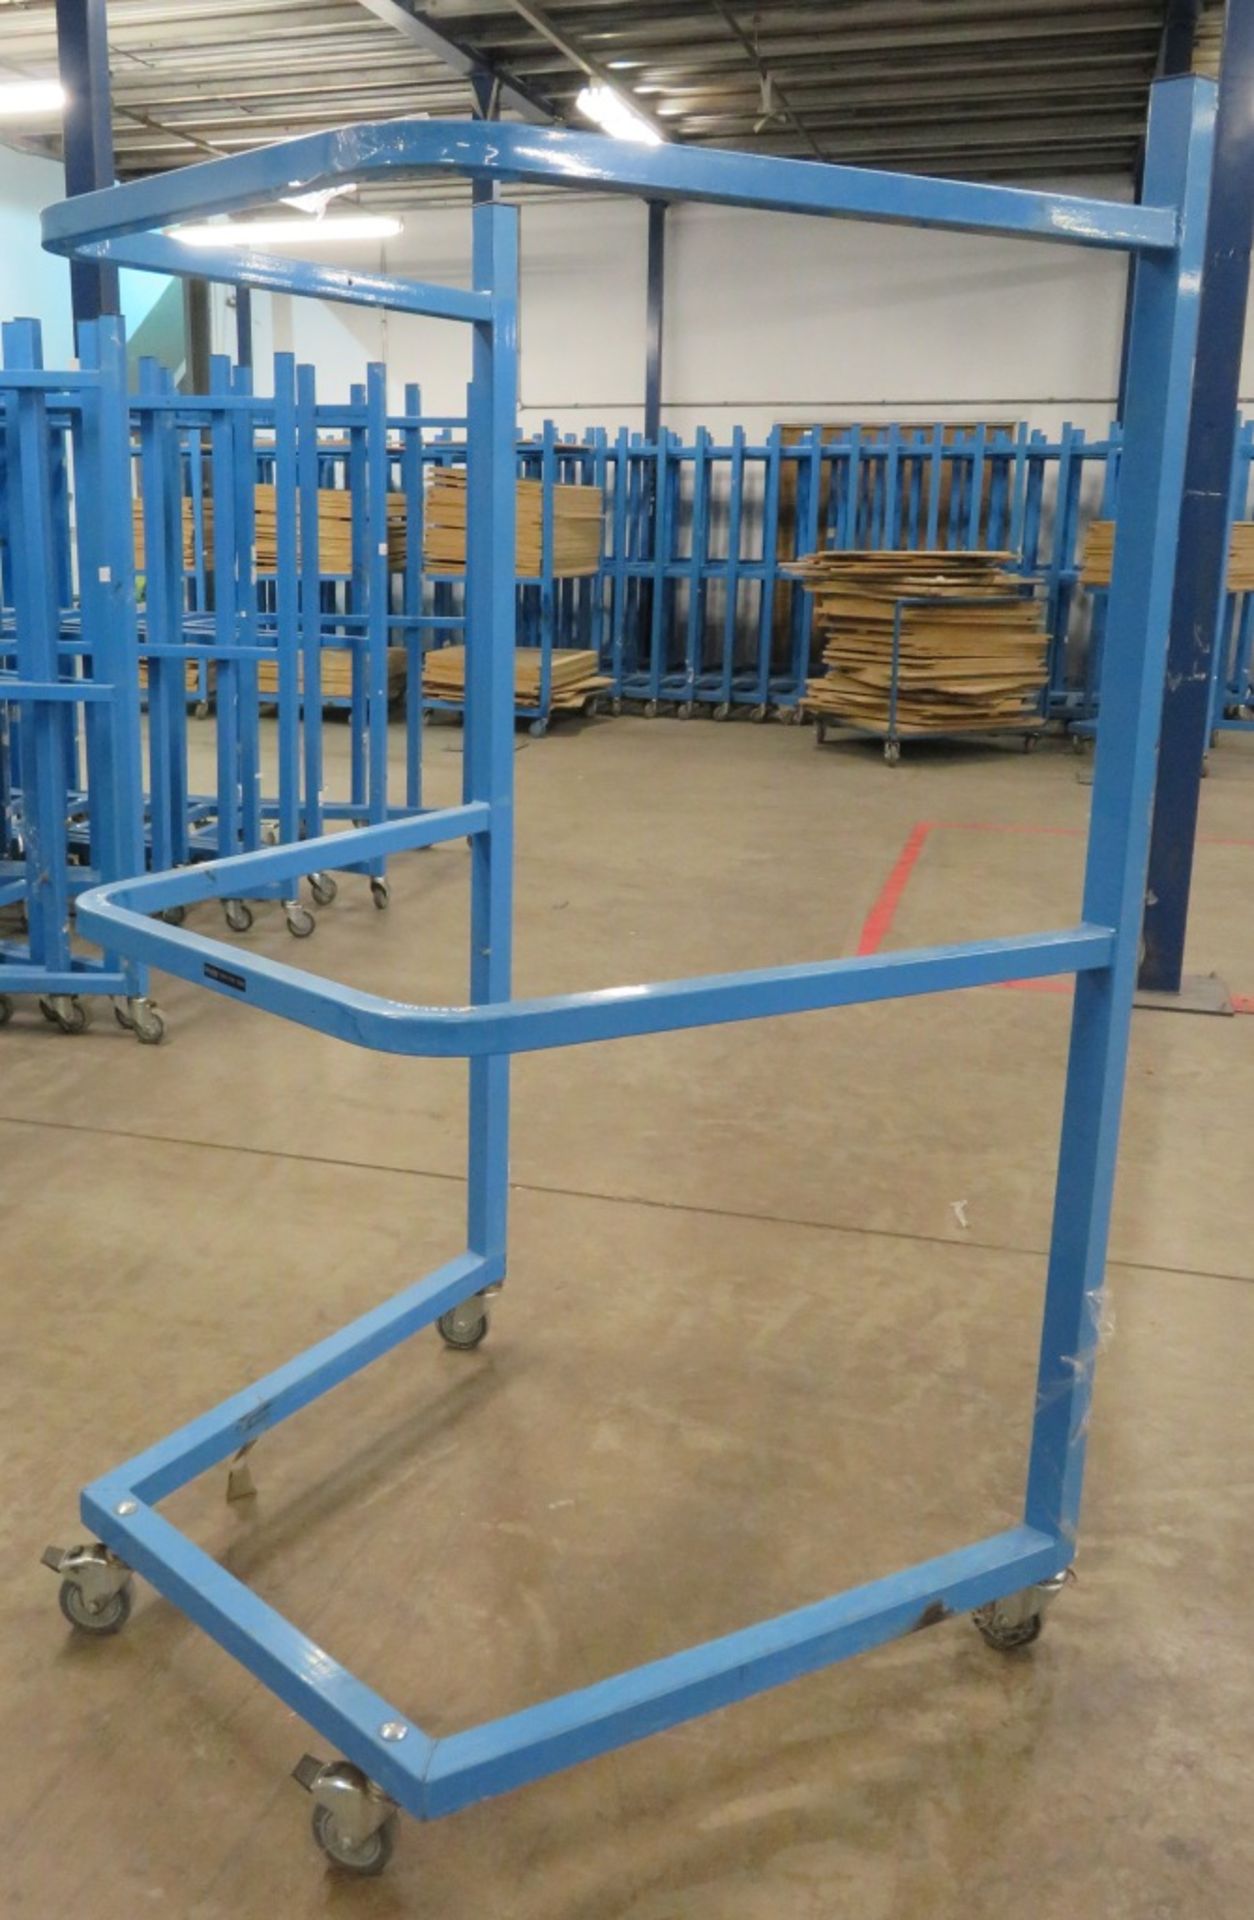 THIS LOT LOCATED AT SWINGBRIDGE ROAD GRANTHAM LINCOLNSHIRE - 10x 3 Tier Storage Trolleys -